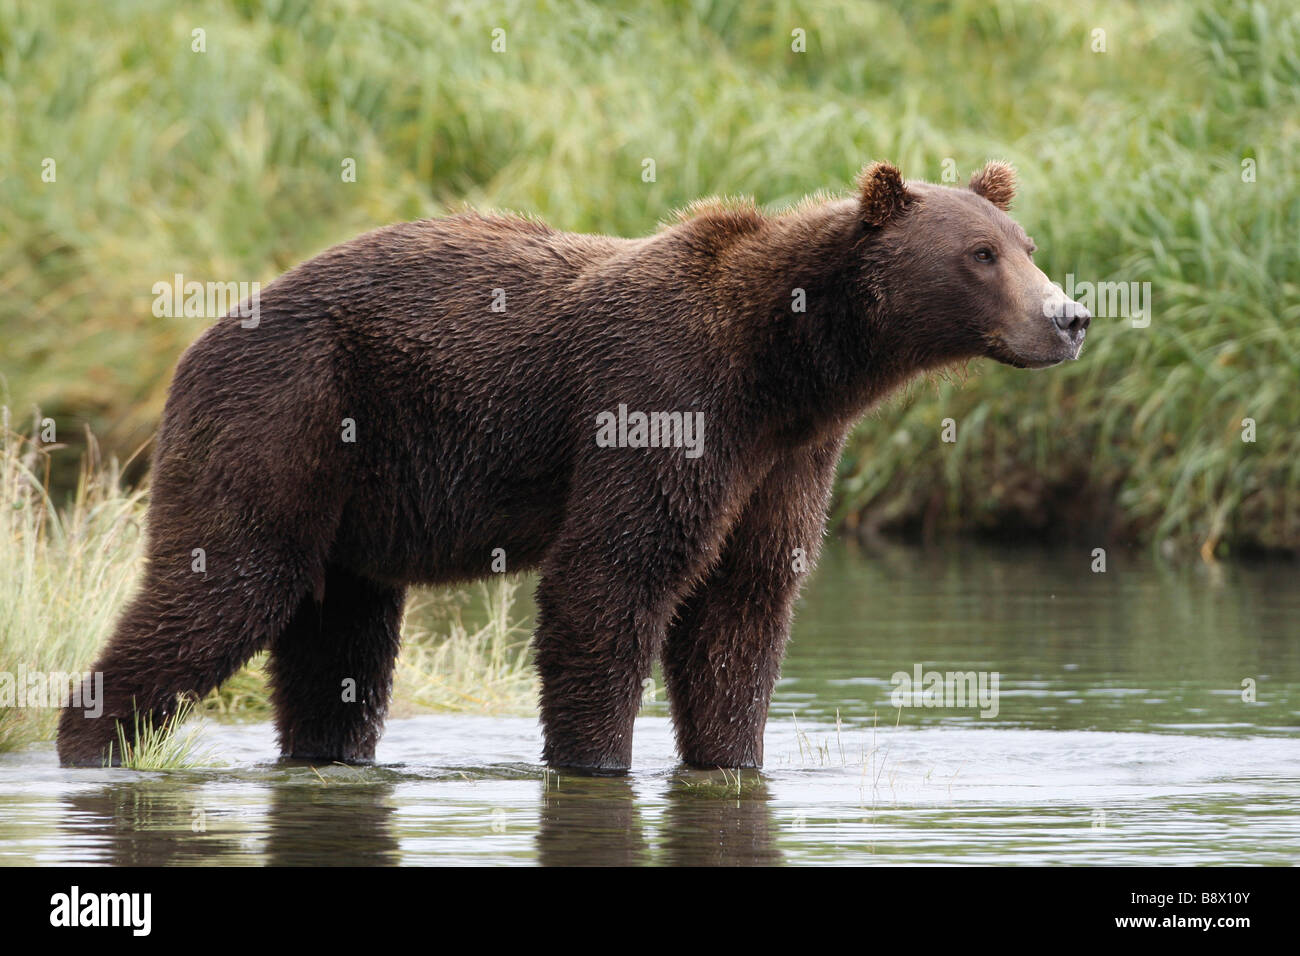 Grizzly bear (Ursus arctos horribilis) standing in a river Stock Photo